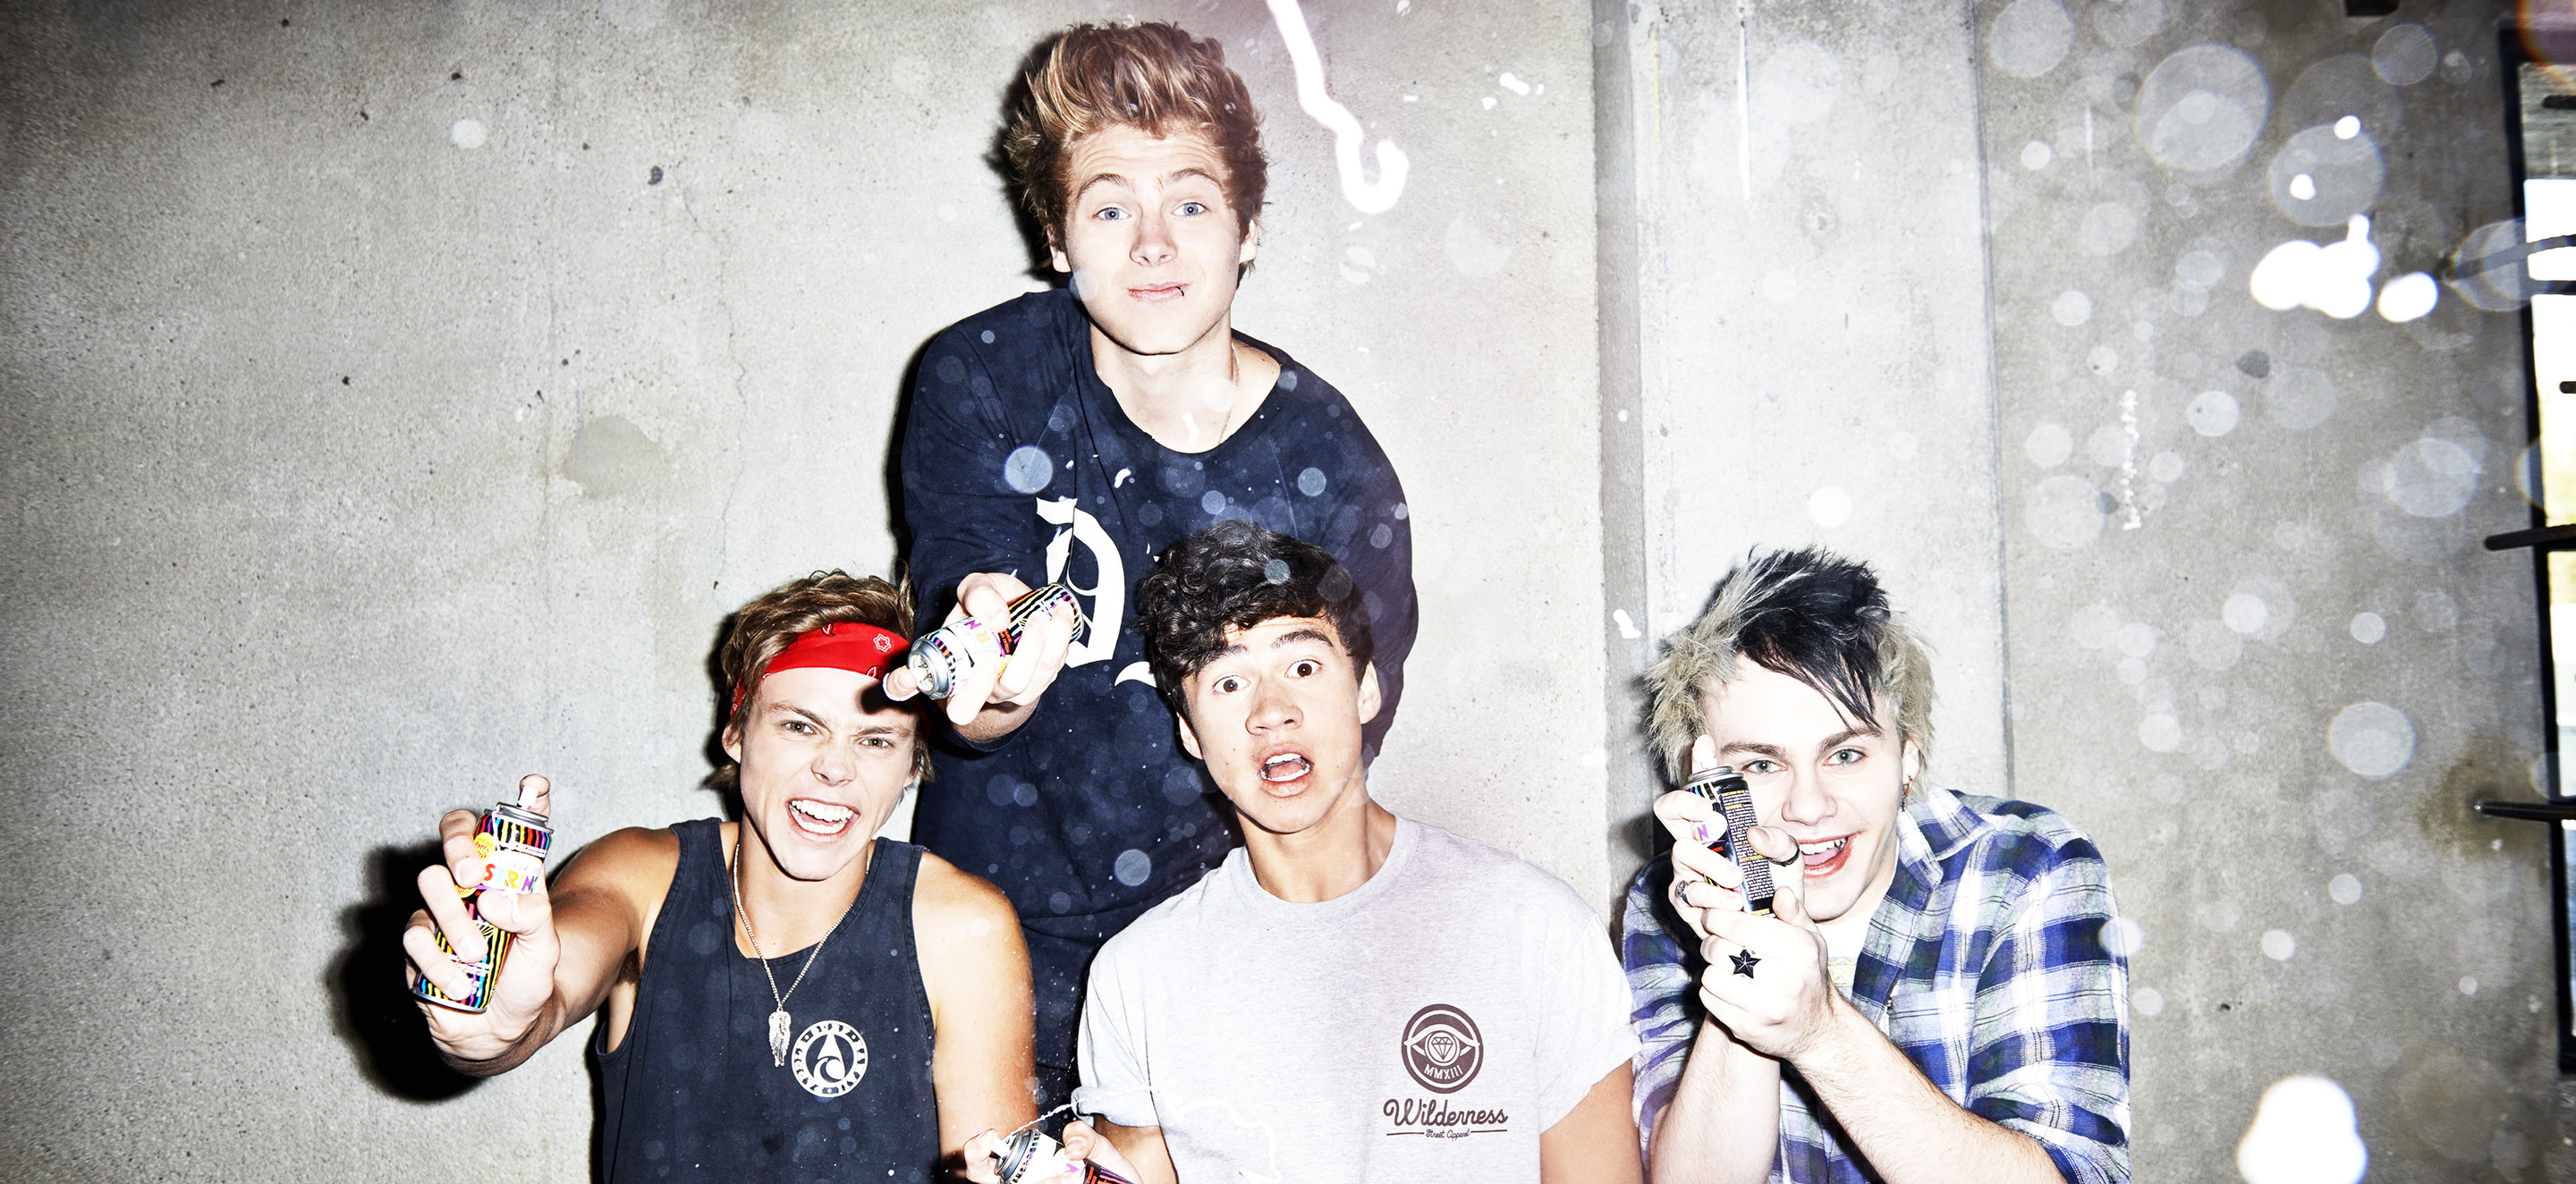 5 Seconds of Summer head for #1 debuts in US, UK